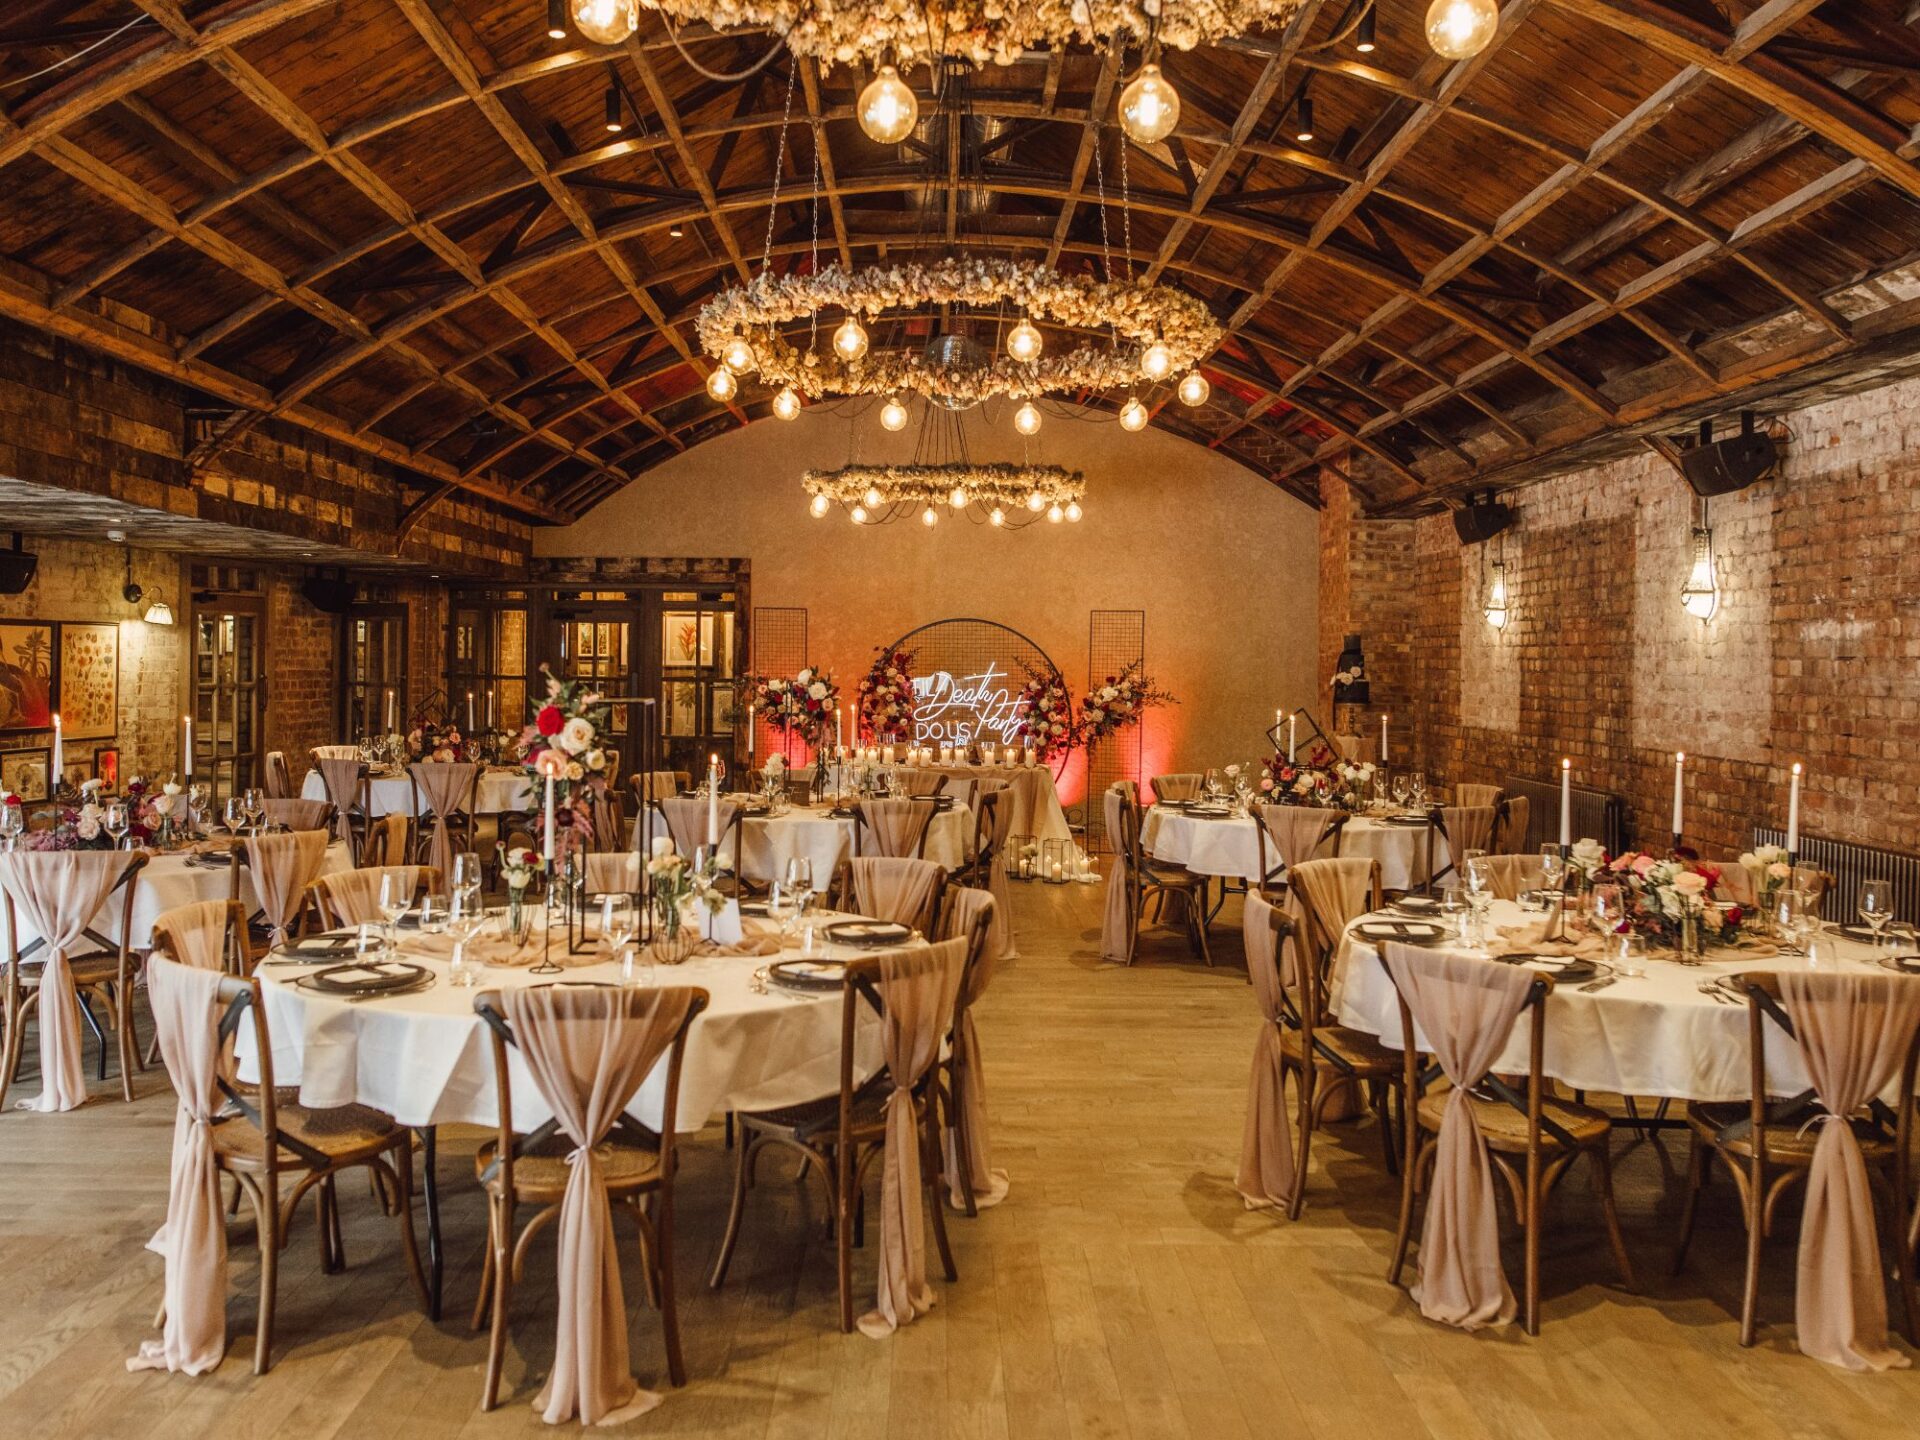 Rooftop drinks, rustic-luxe charm and romance – Tour The Wildings wedding venue in Morpeth Northumberland